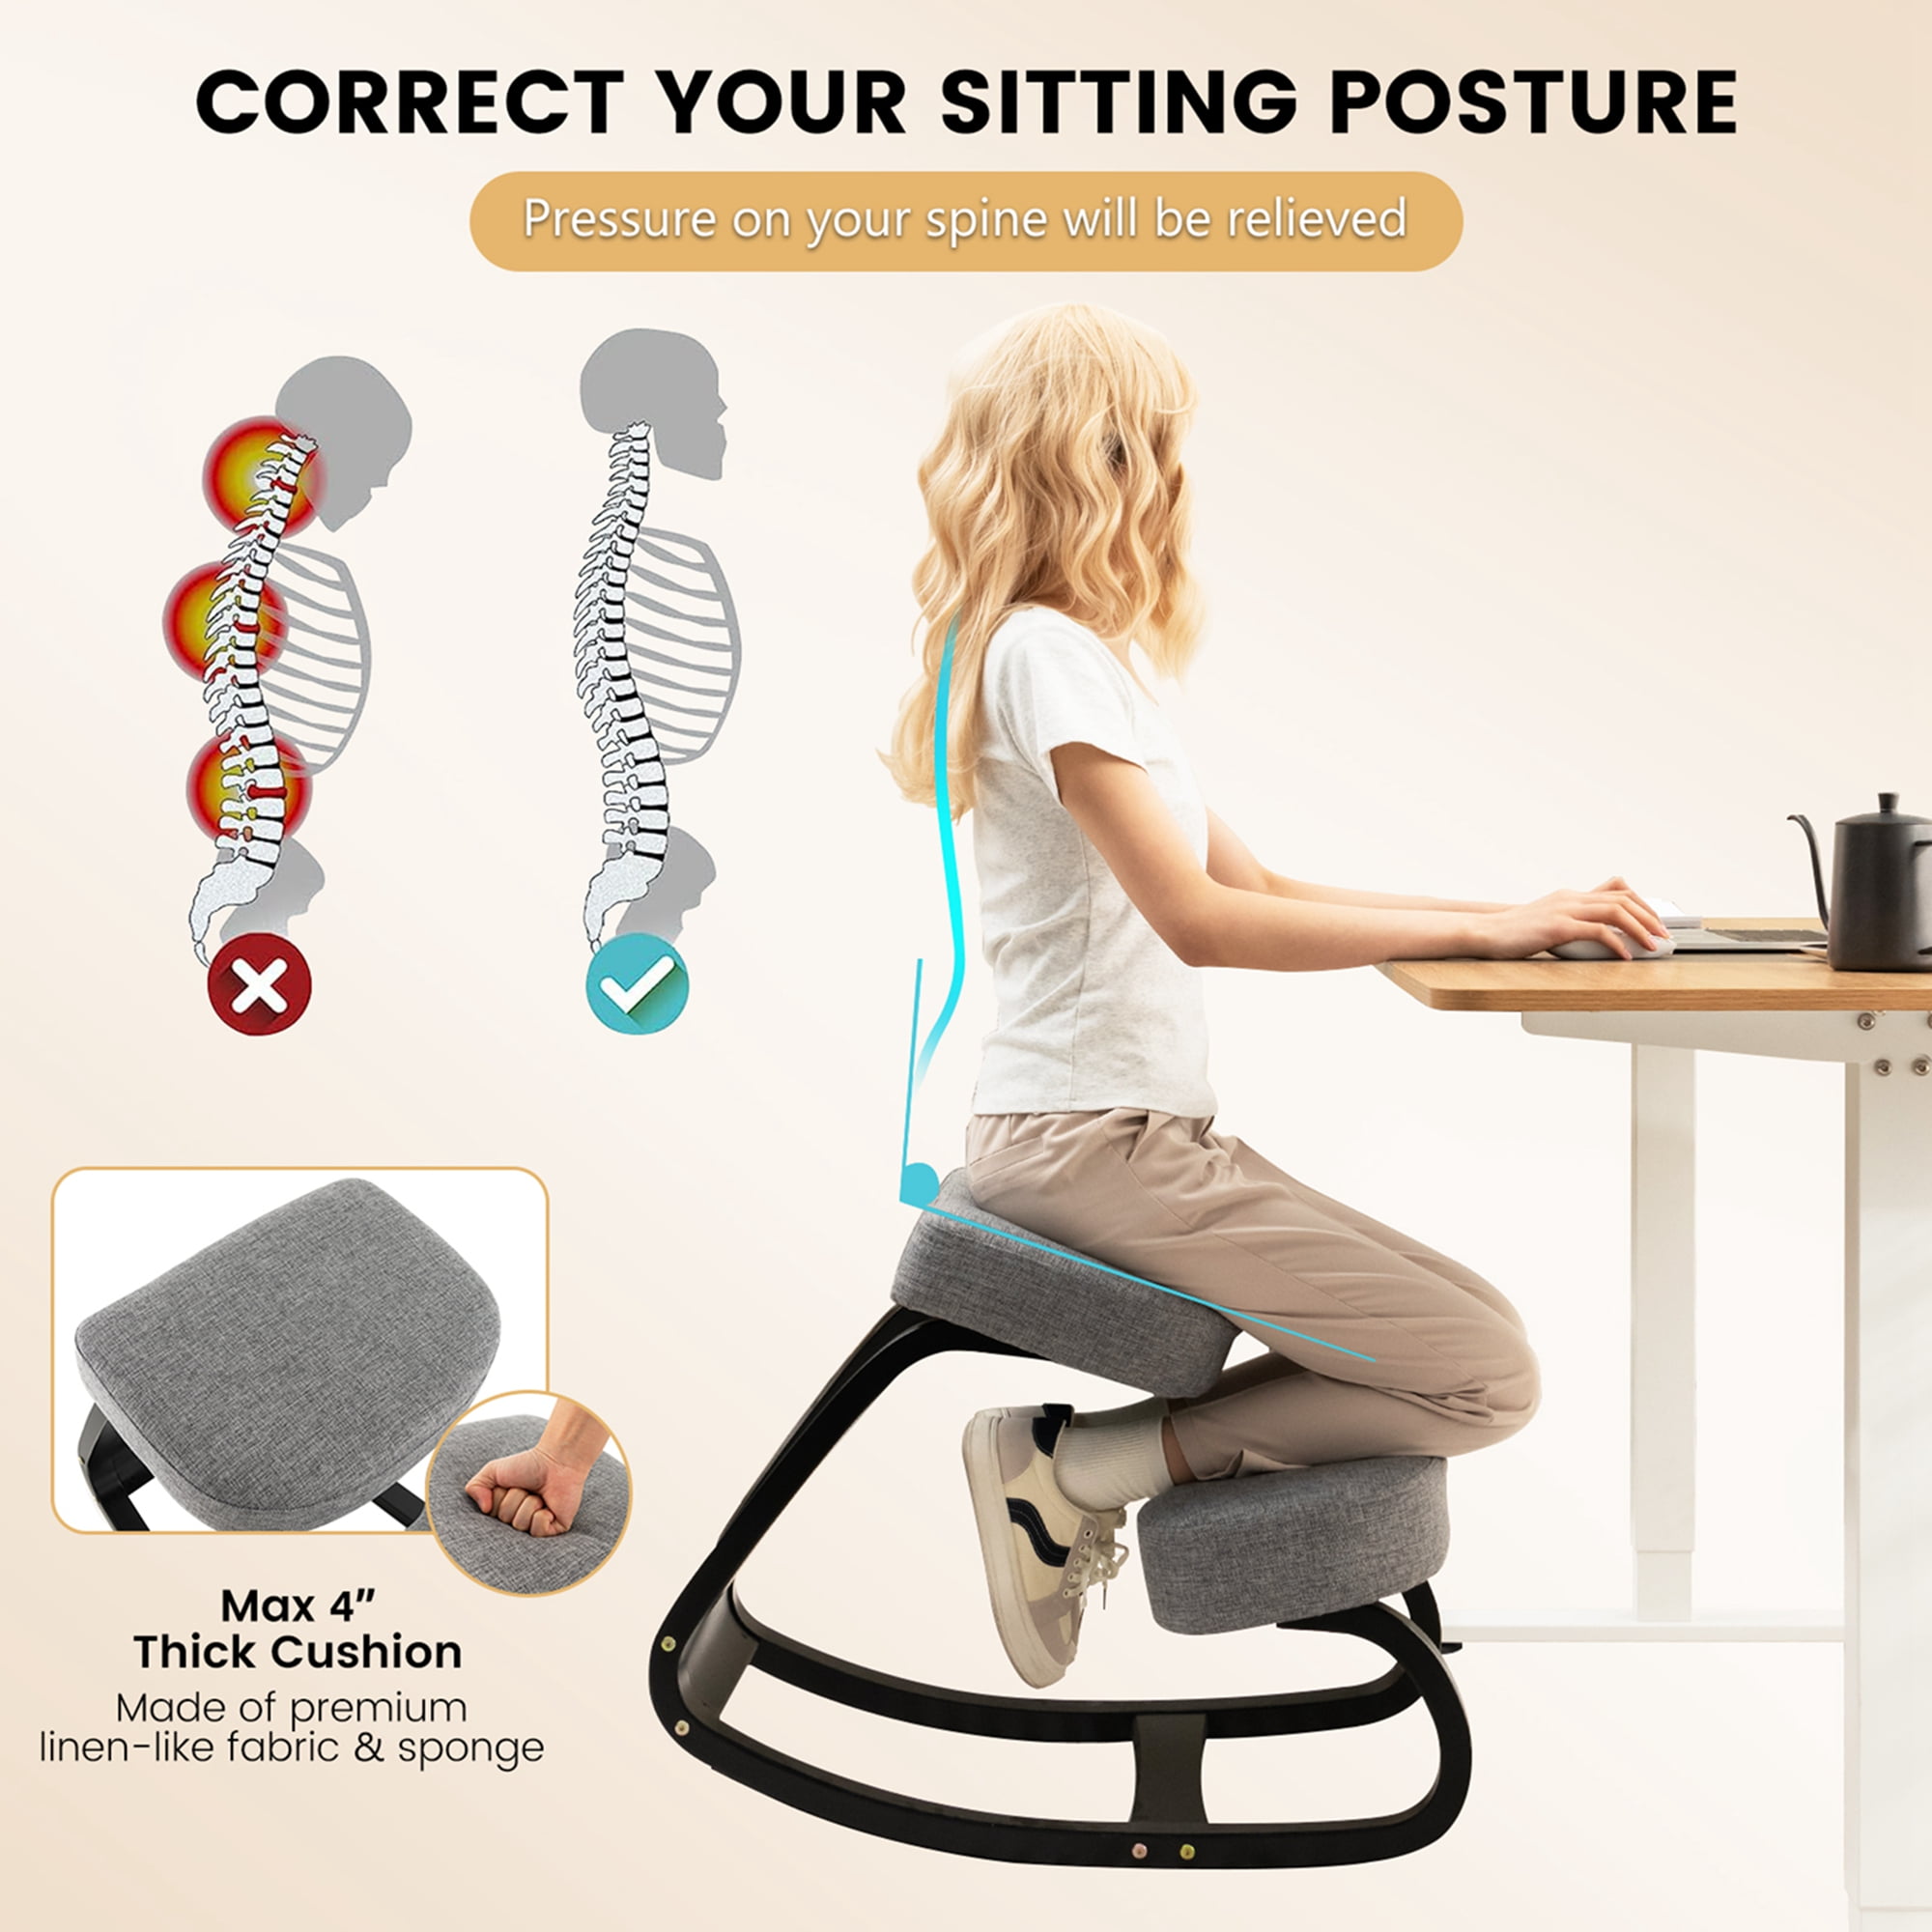 Costway Ergonomic Kneeling Chair Wooden Rocking Chair With Comfortable  Padded Seat Cushion & Knee Support Upright Posture Support Chair For Back  Pain Relief Beige/black/gray : Target